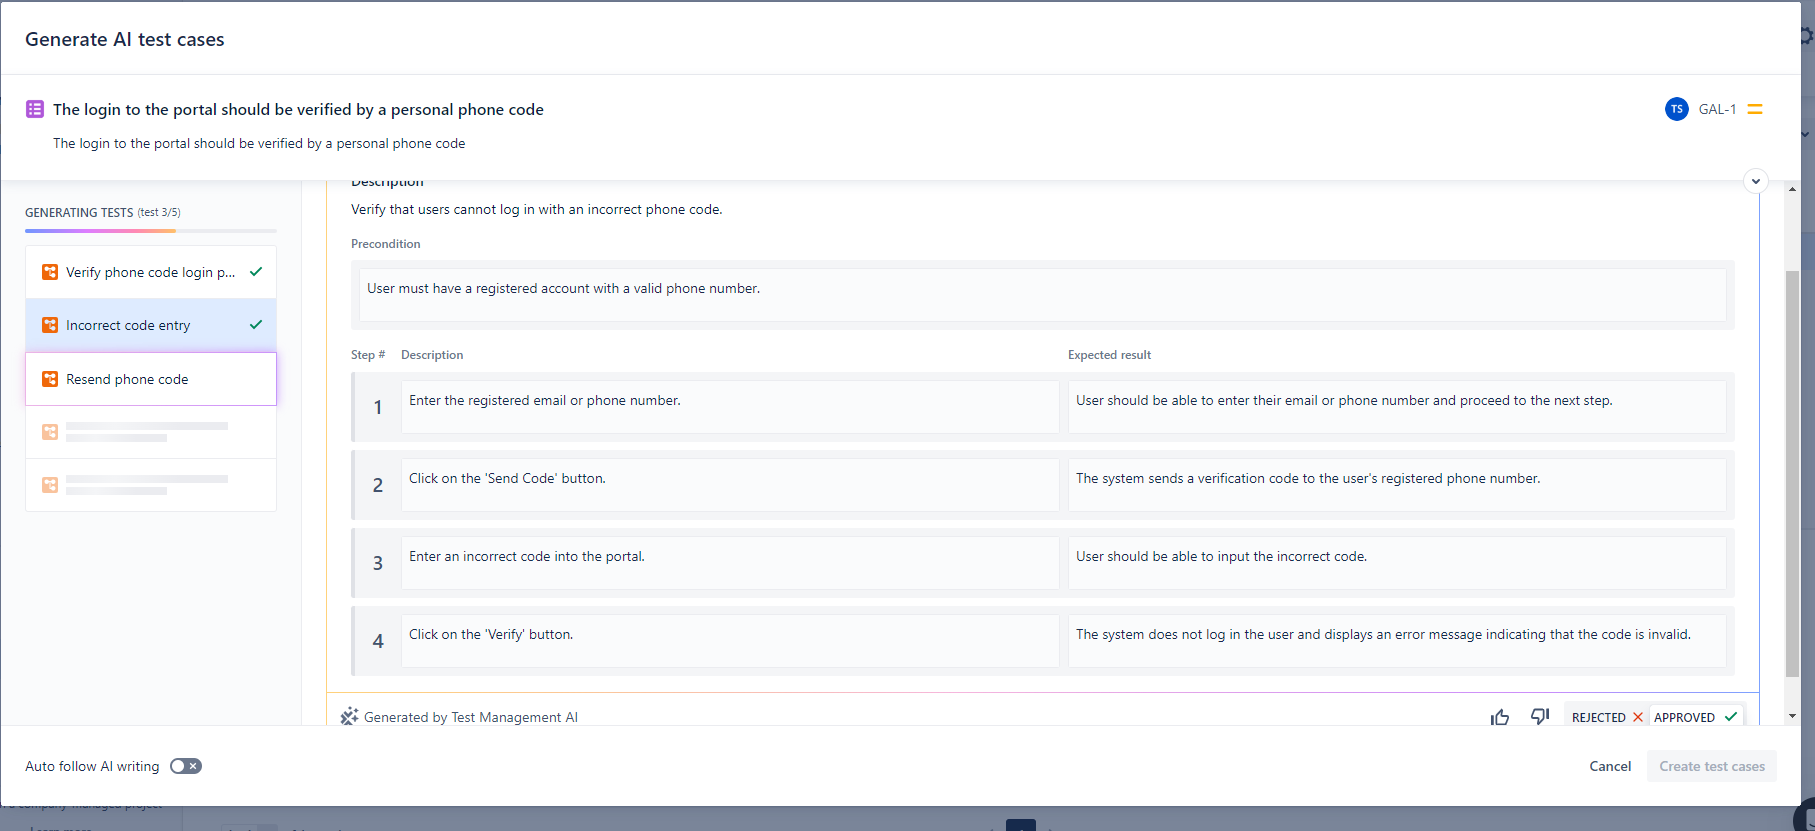 Screenshot of Tricentis Test Management for Jira's AI test-case generation